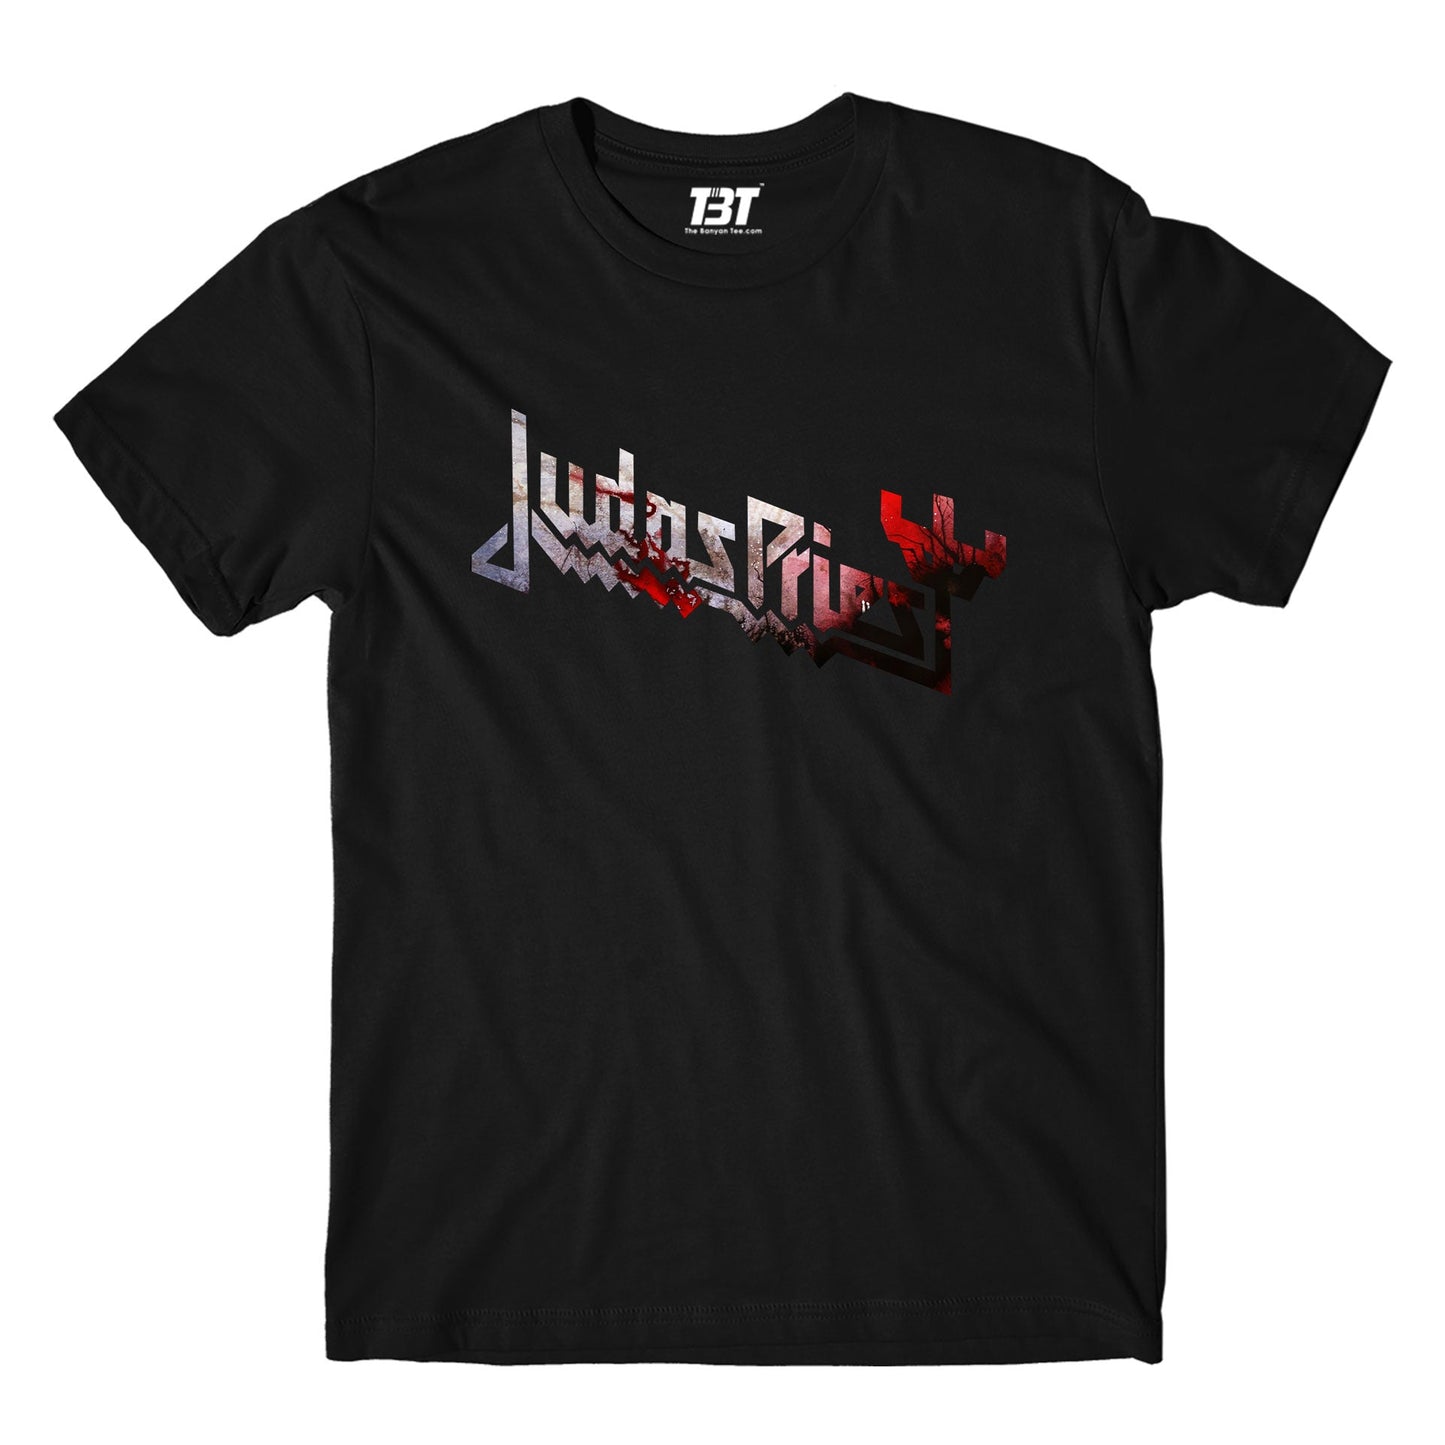 the banyan tee merch on sale Judas Priest T shirt - On Sale - XS (Chest size 36 IN)